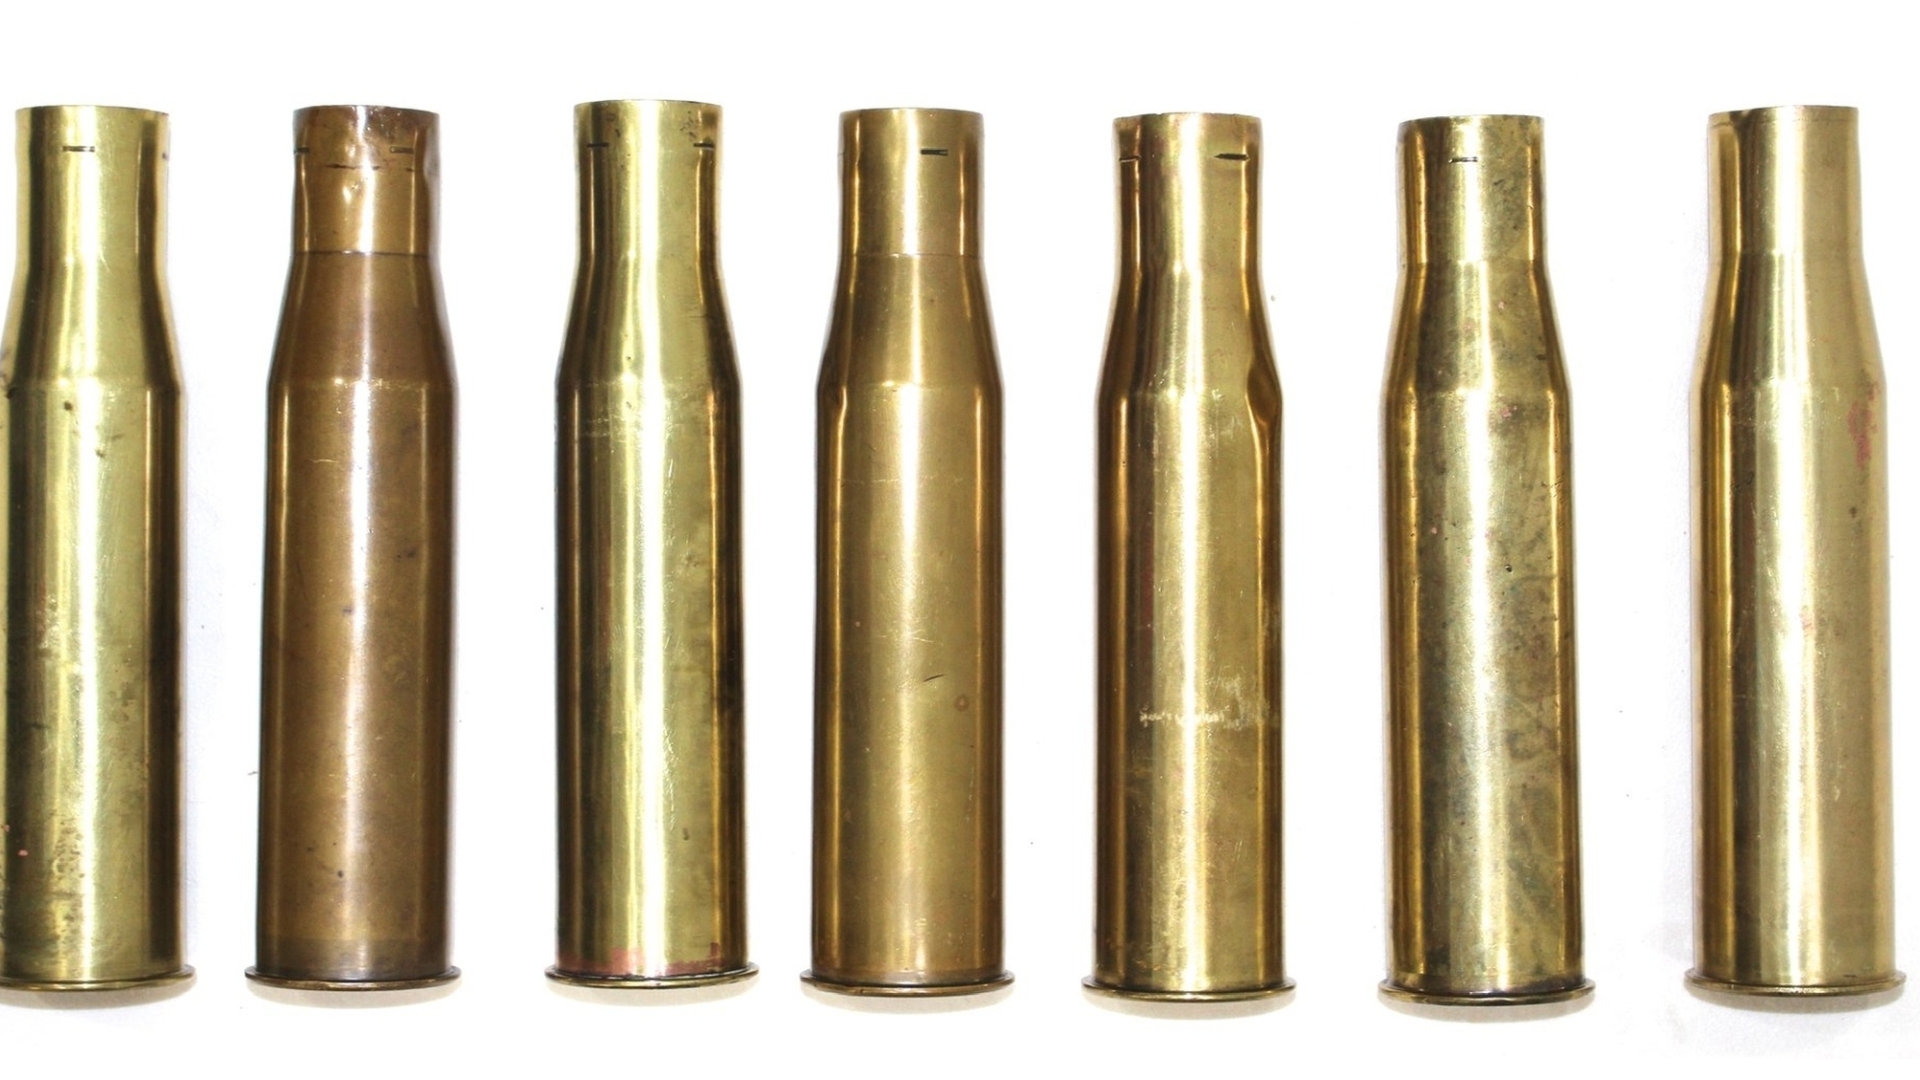 Shell Cases Archives - MJL Militaria